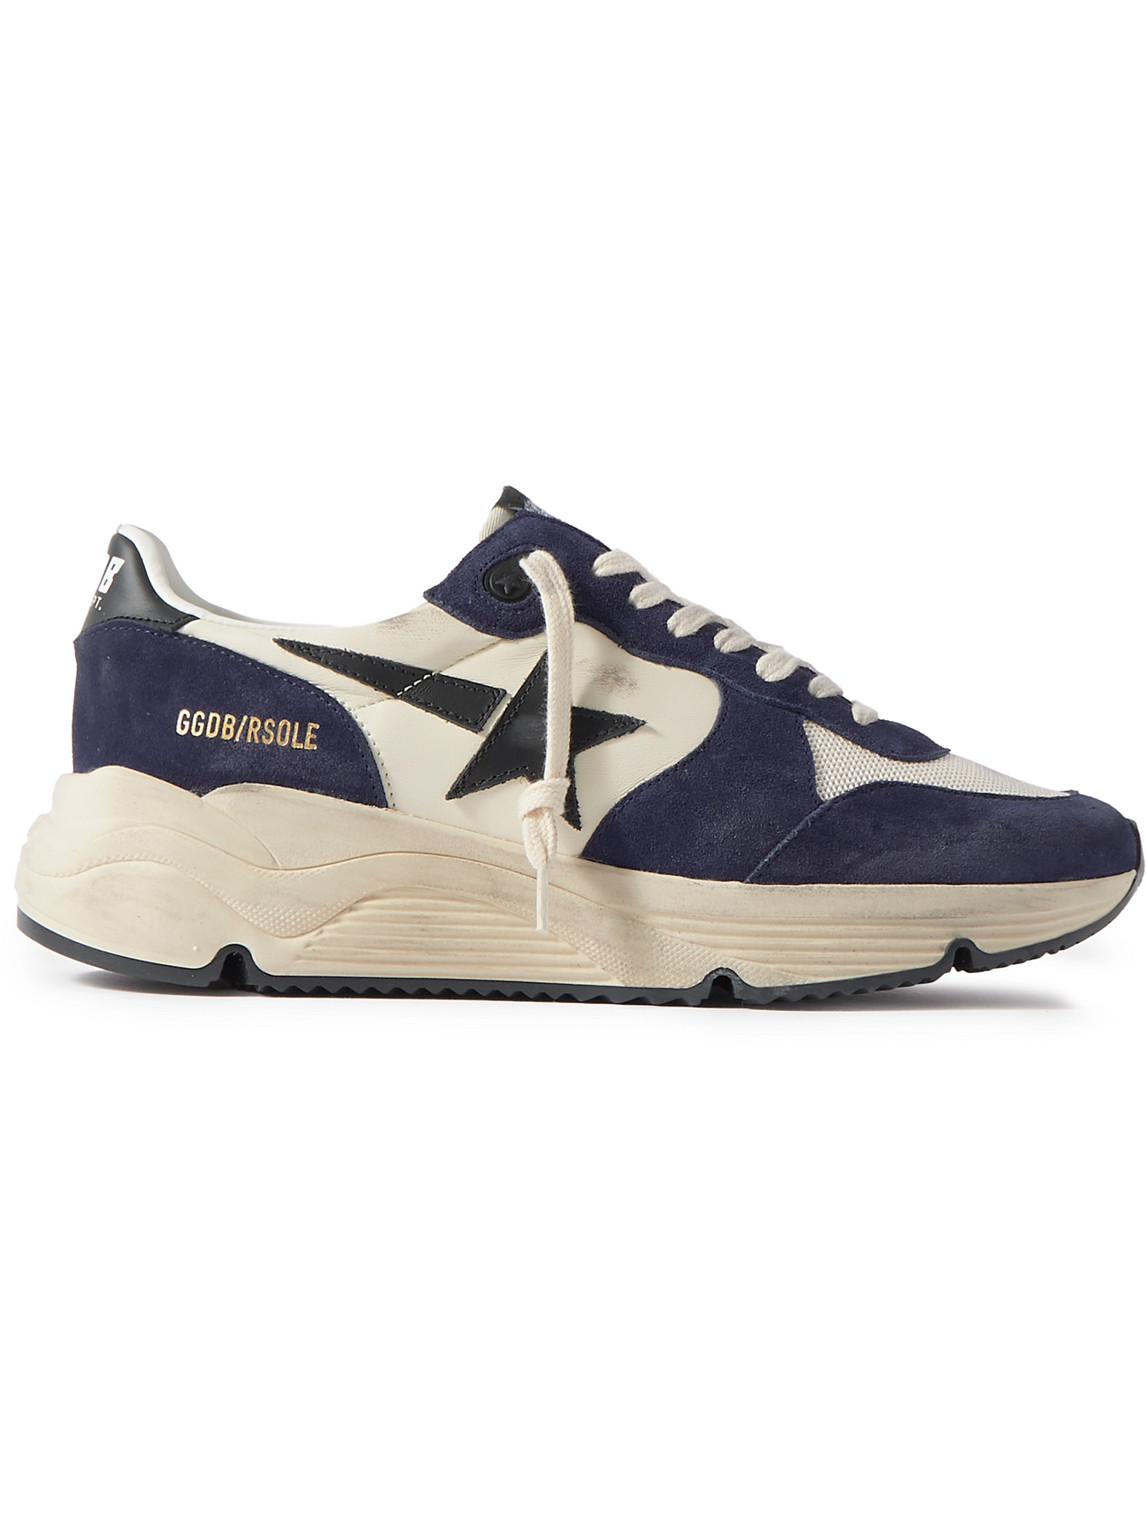 Golden Goose Running Sole Distressed Leather, Suede And Mesh Sneakers In Blue